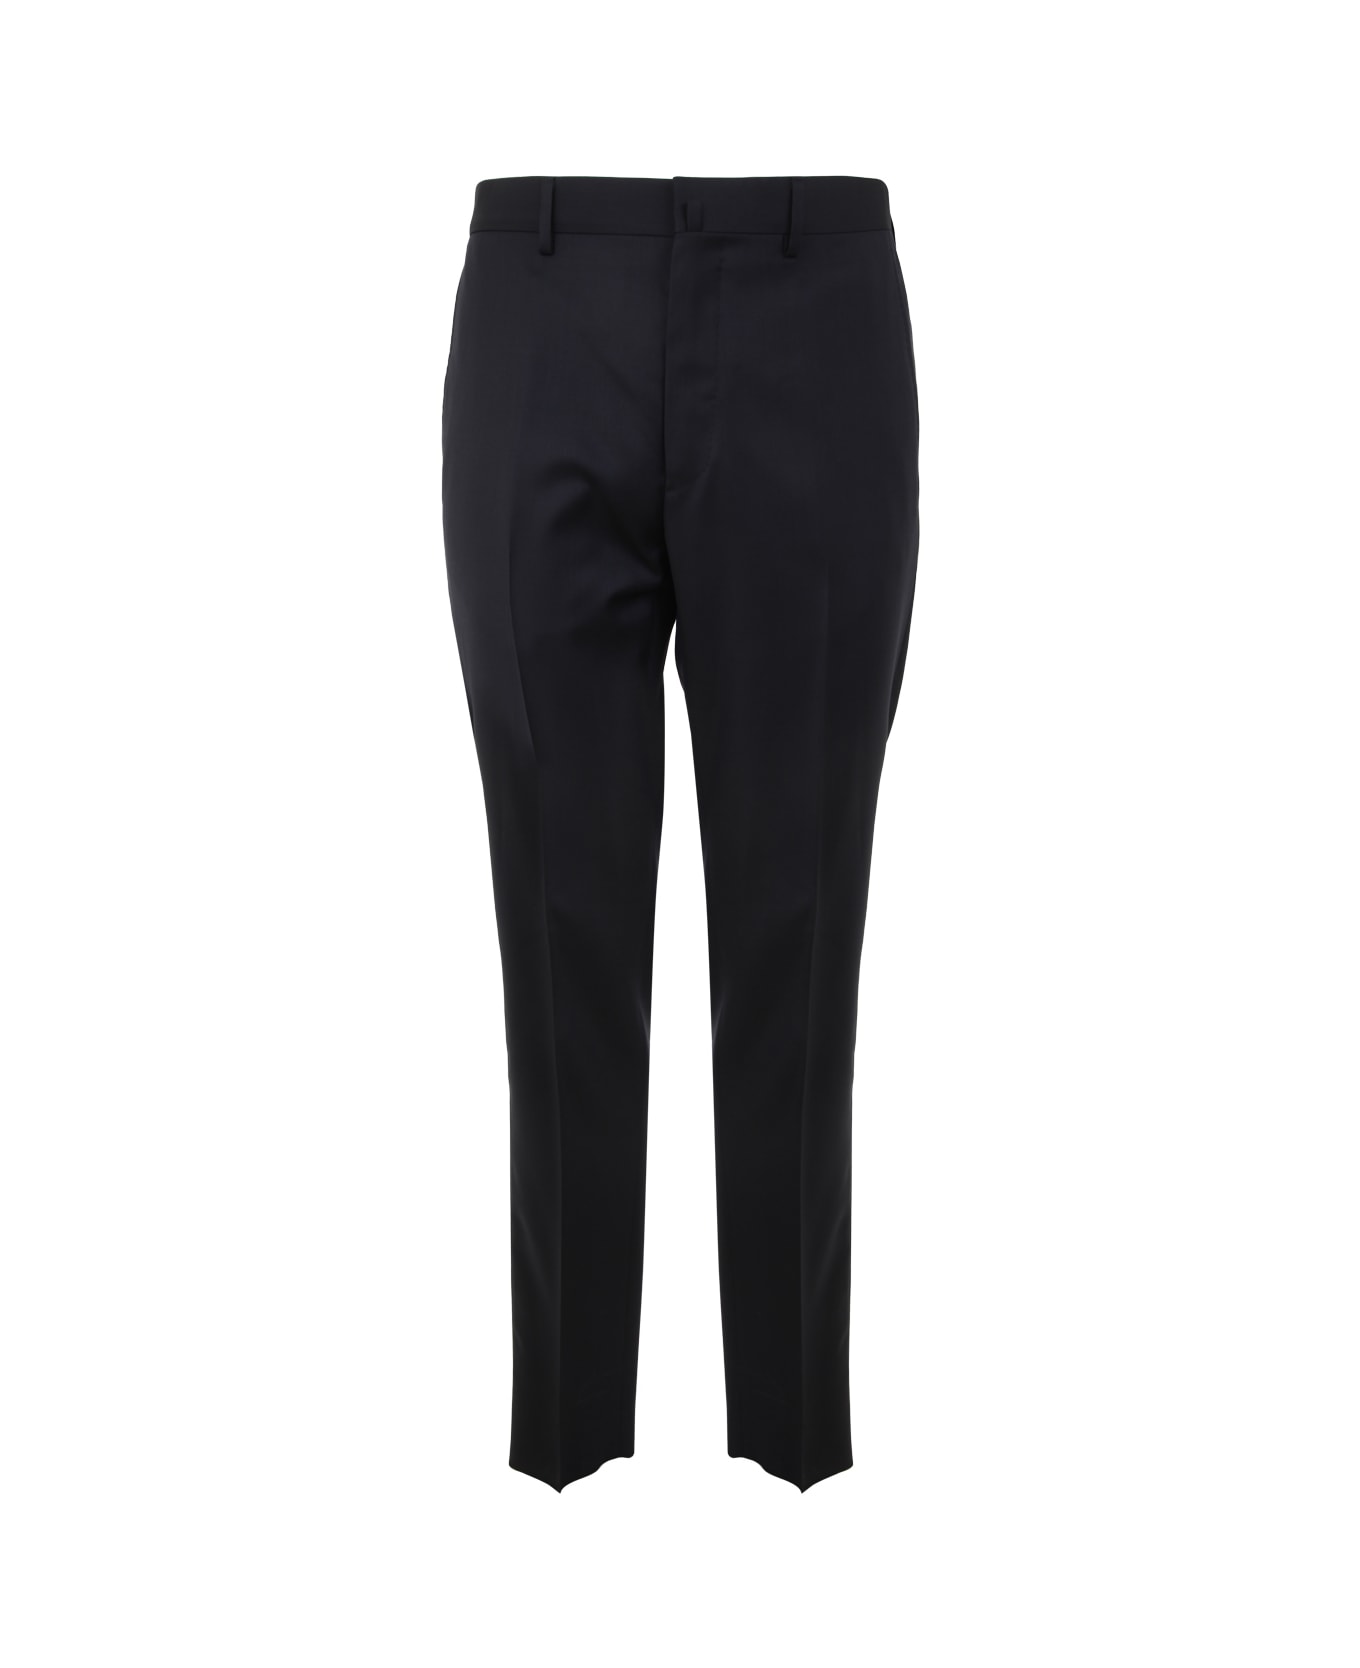 Lanvin Cigarette Trousers - Navy Blue ボトムス